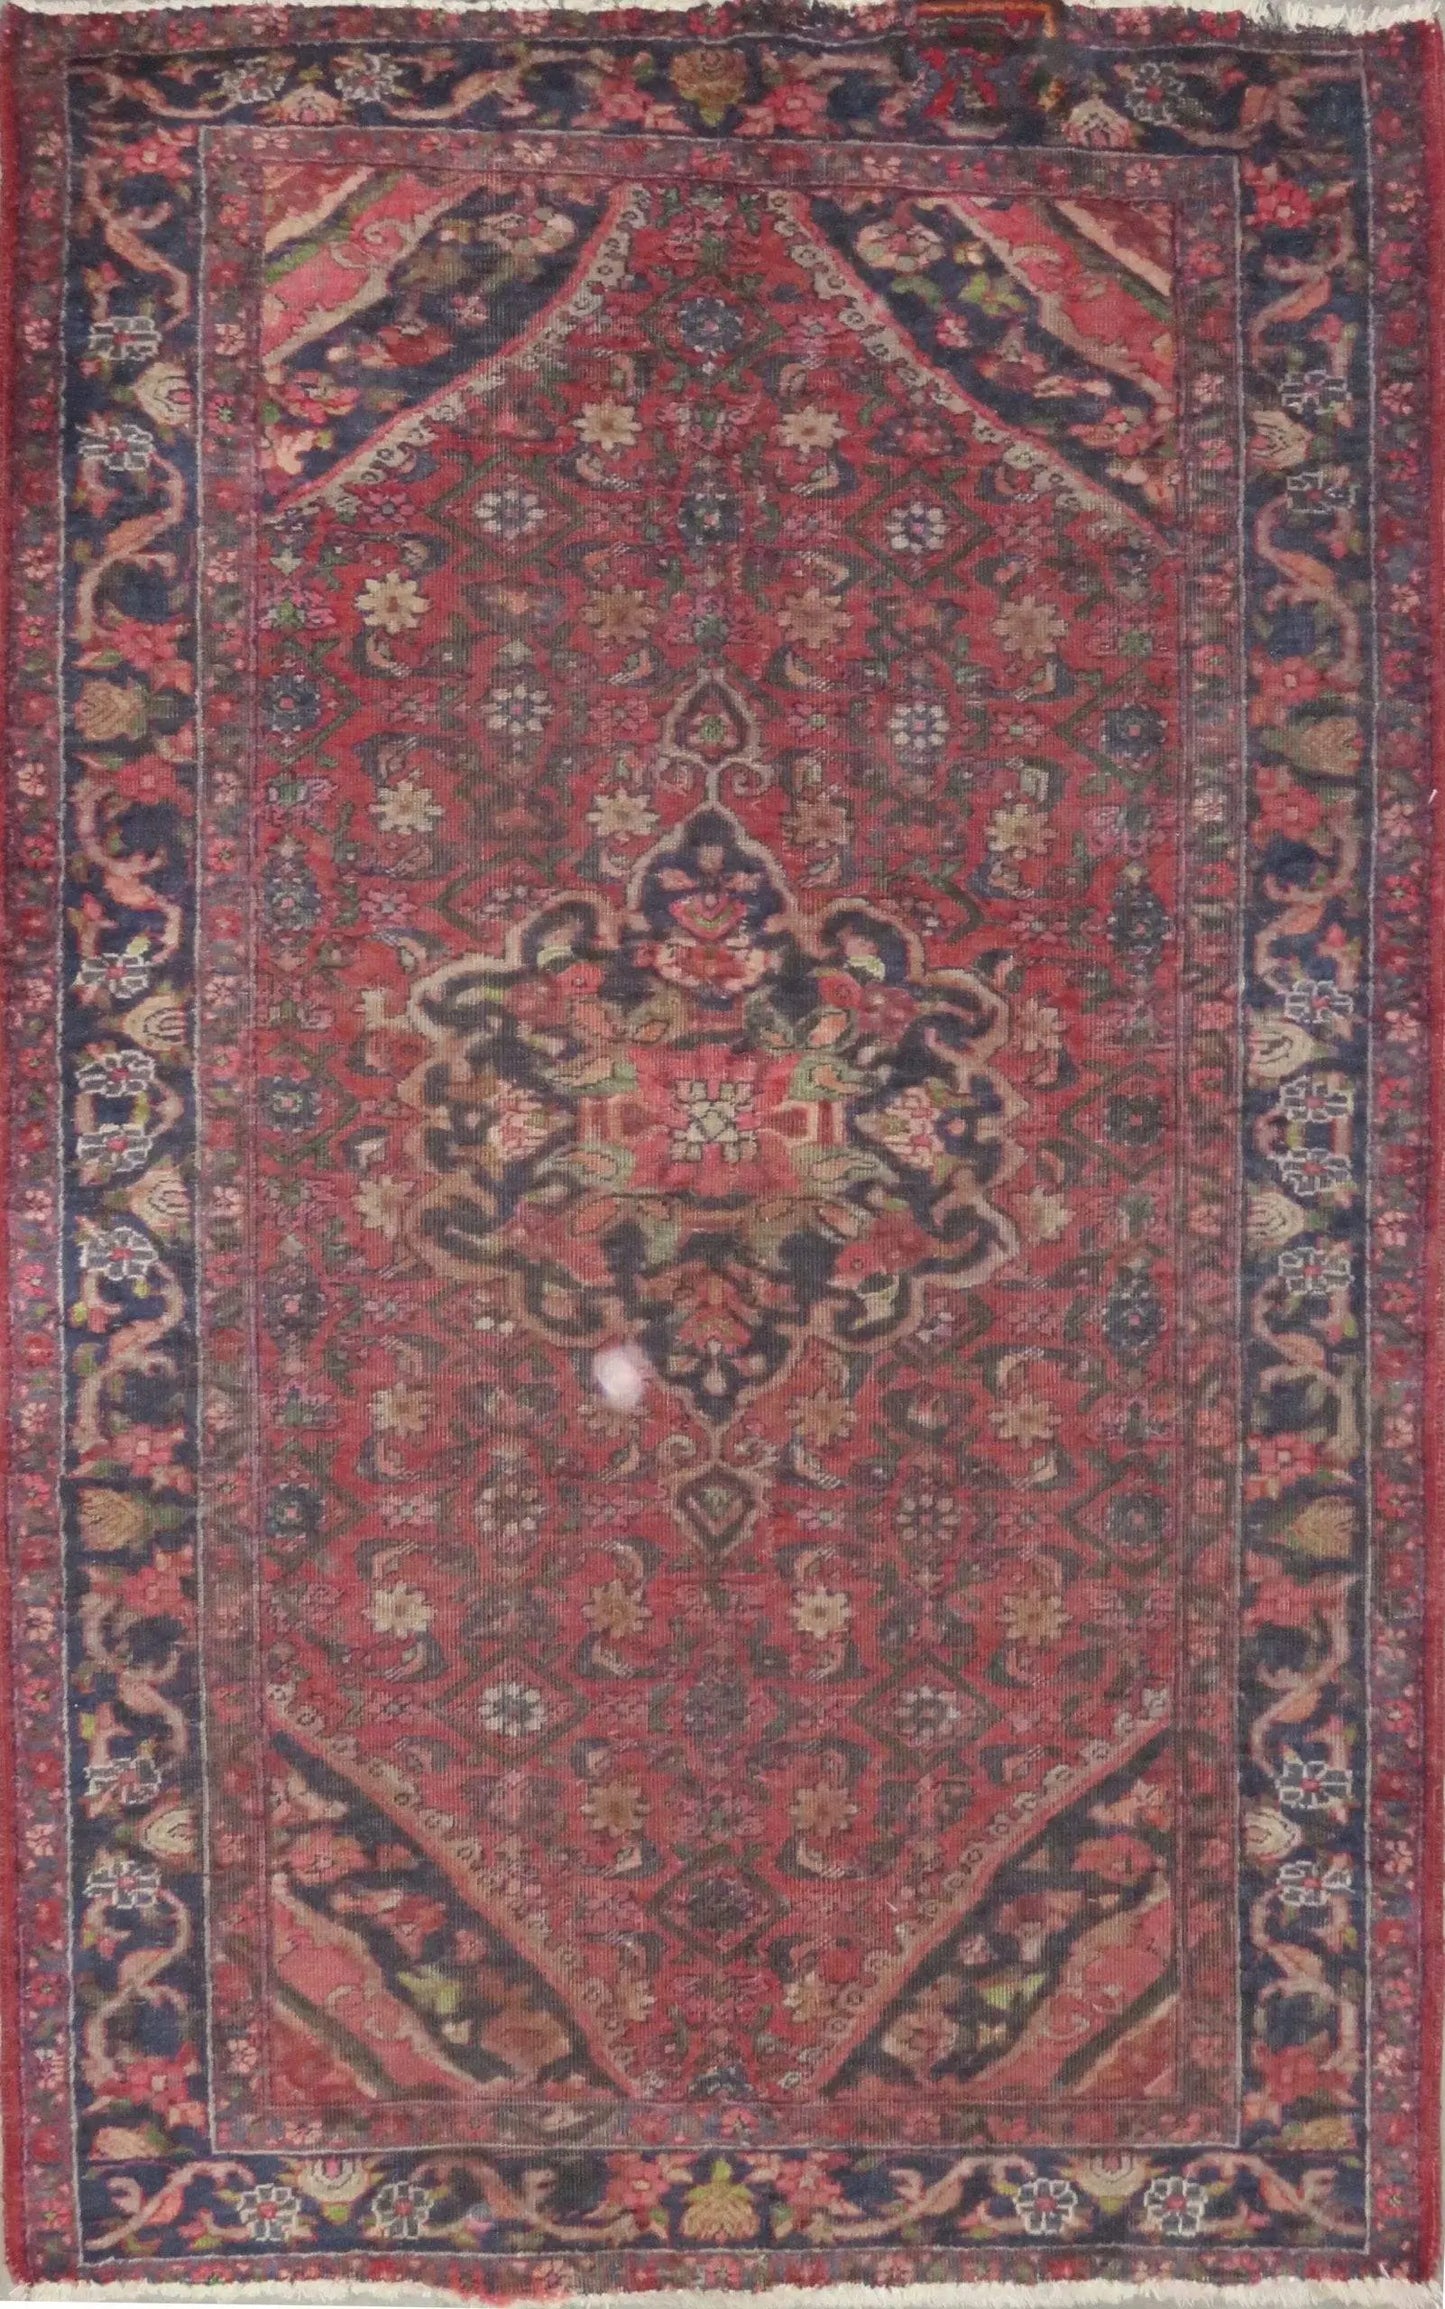 Hand-Knotted Persian Wool Rug _ Luxurious Vintage Design, 6'4" x 4'0", Artisan Crafted